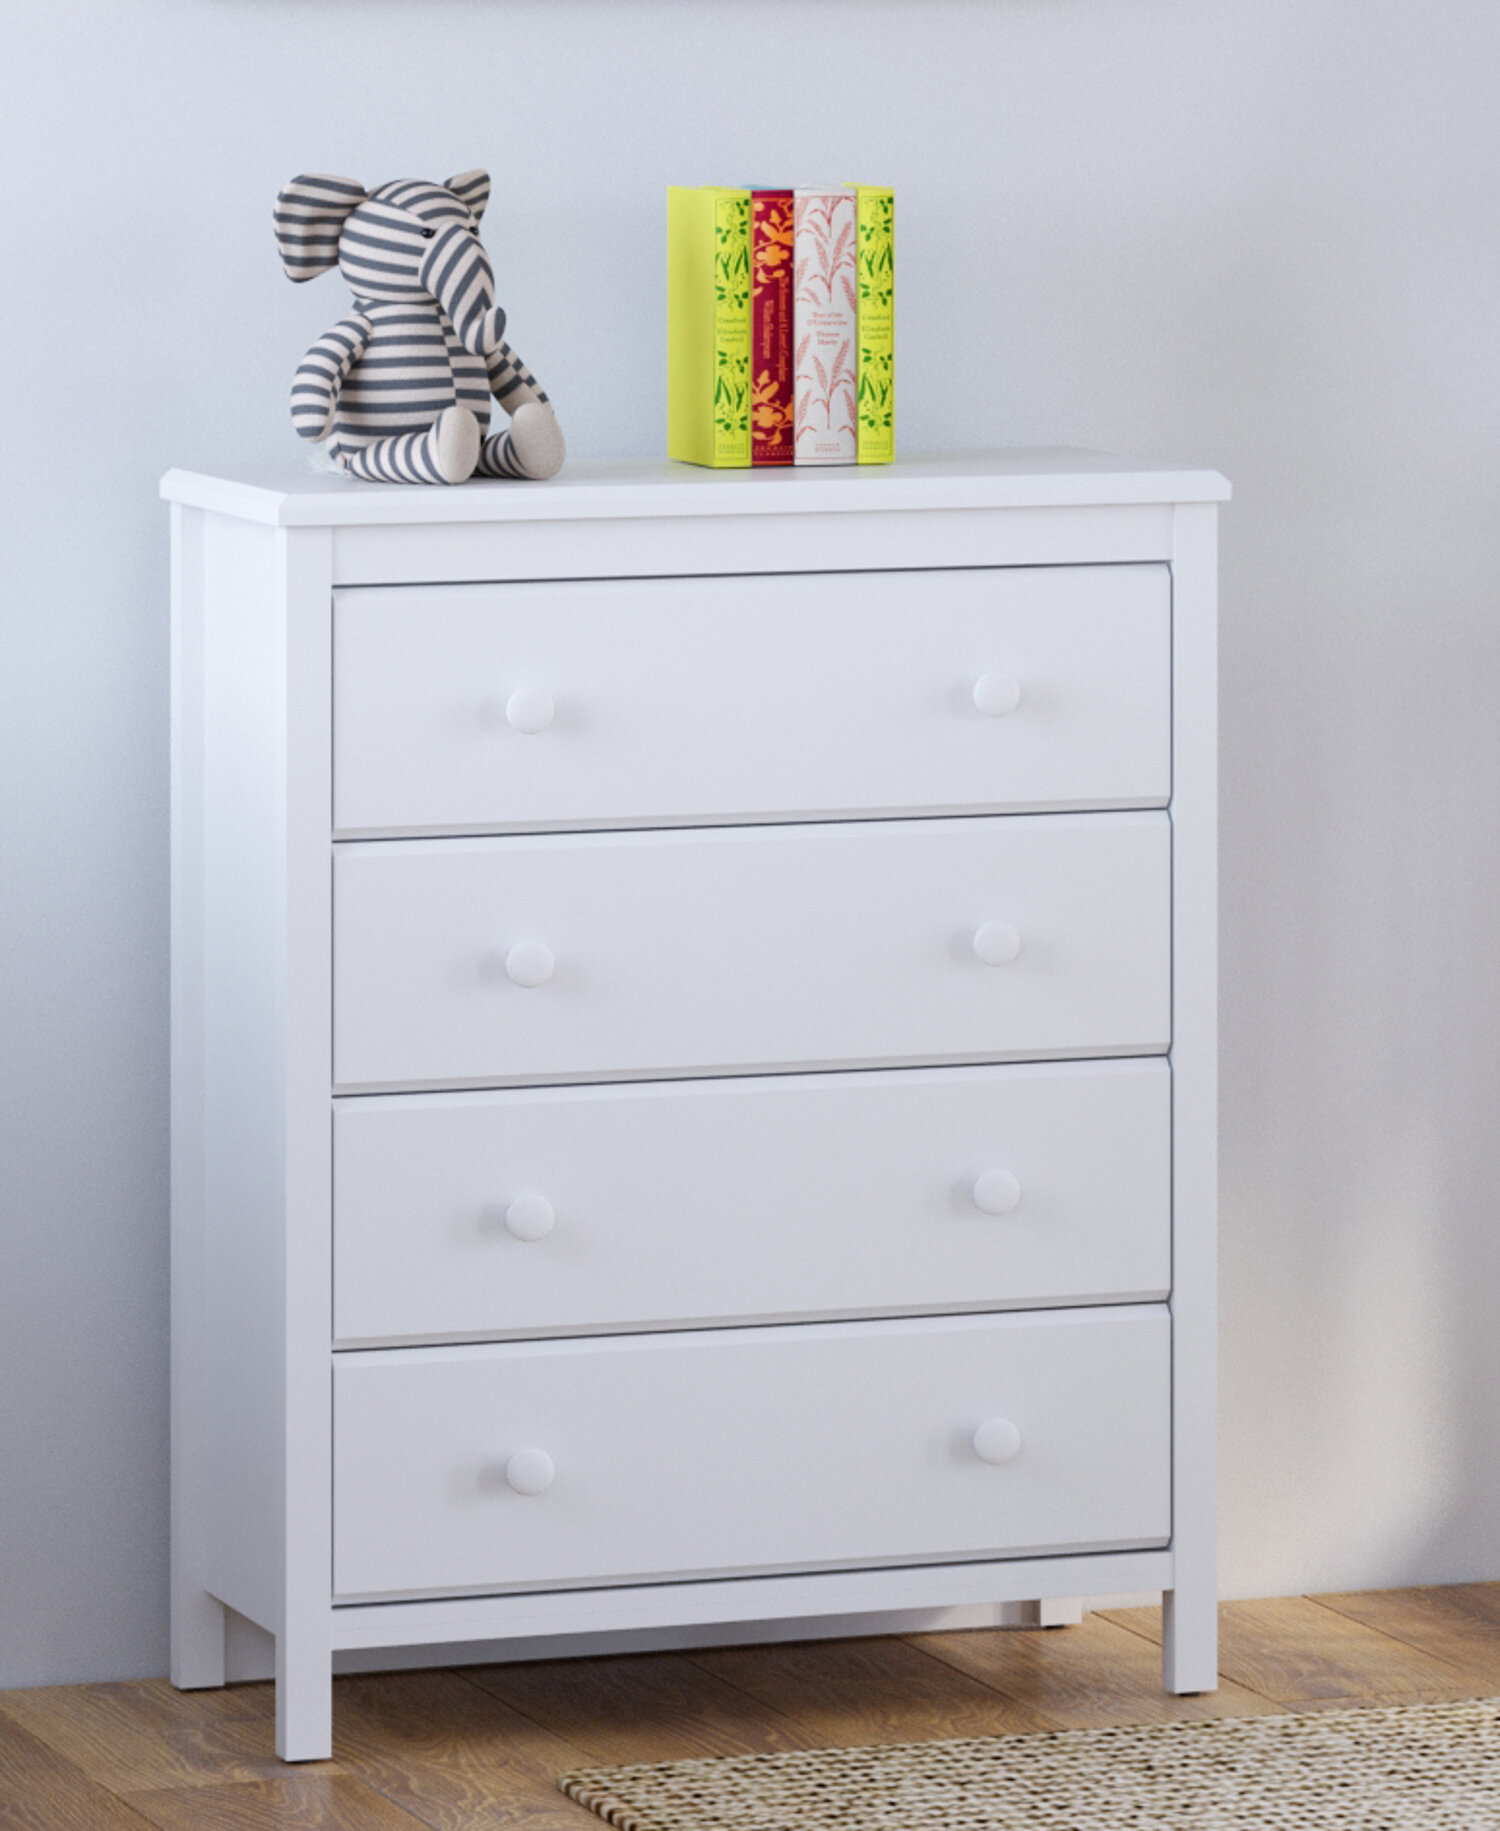 4 Spacious Drawers With Handles Stylish Storage Dresser Chest For